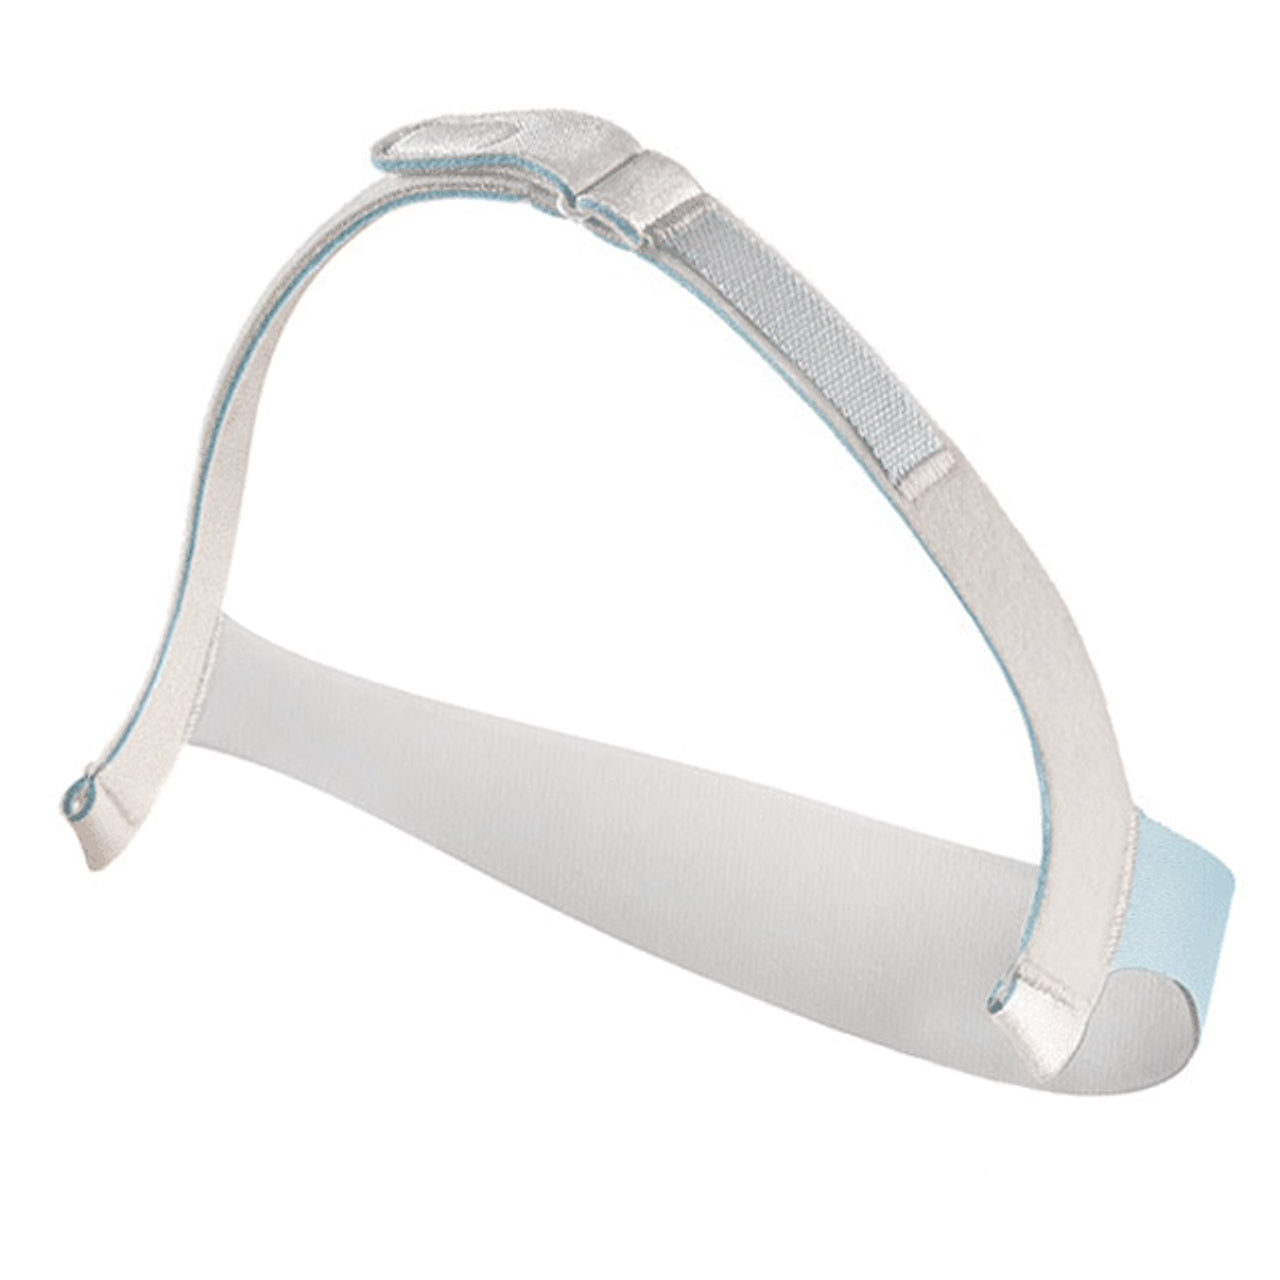 Phillips Respironics headgear from the Nuance Pro and Nuance Gel Pillow Mask